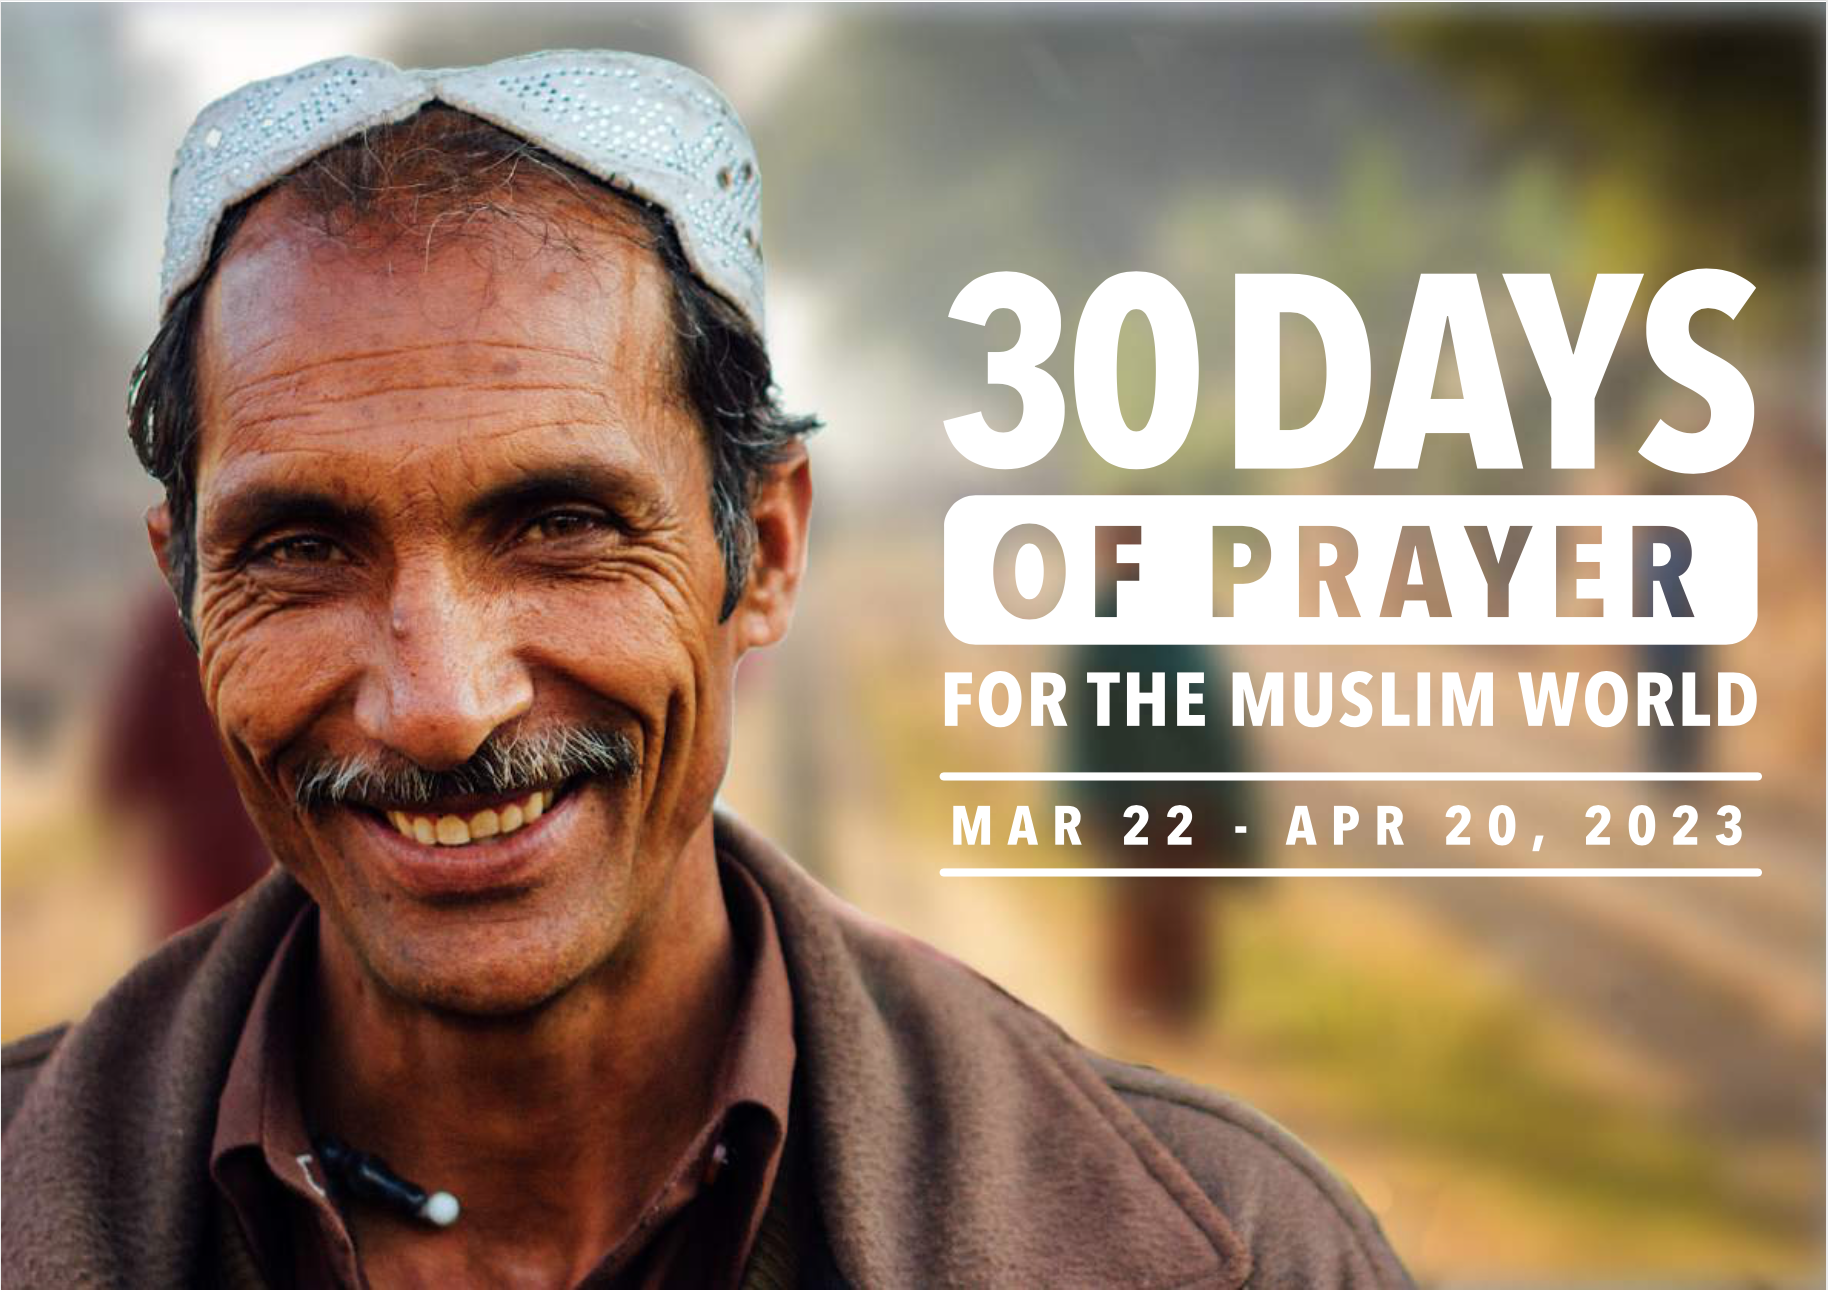 praying for the muslim world in 30 days